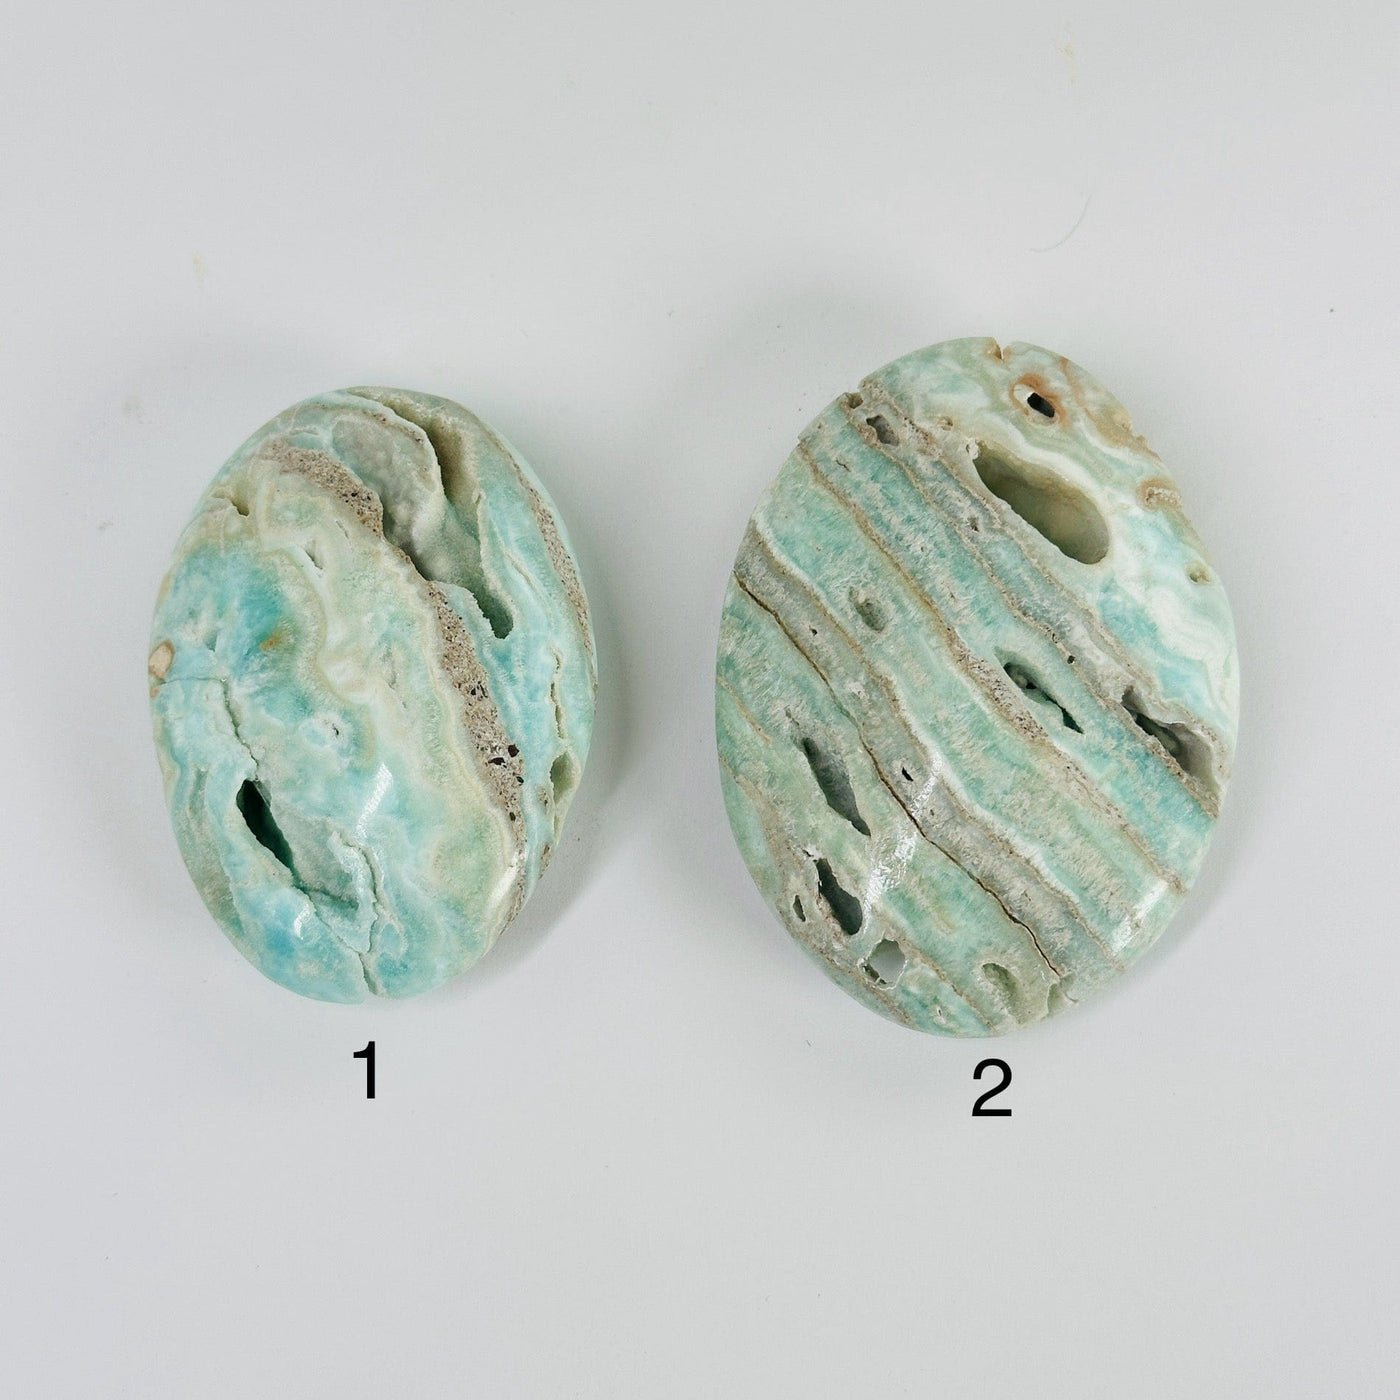 blue aragonite palm stones with decorations in the background